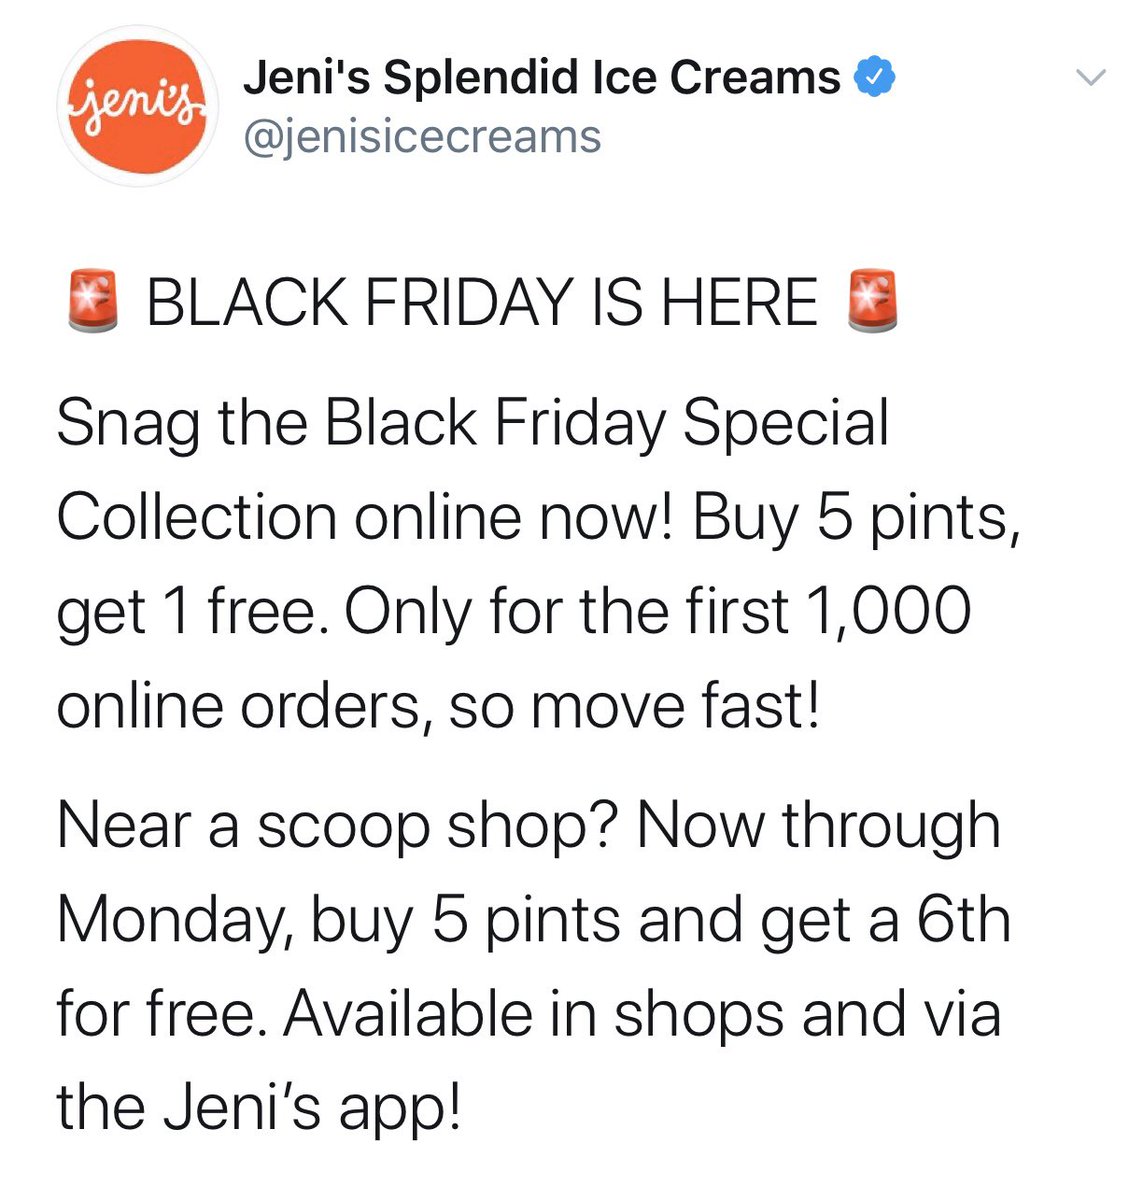  @jenisicecreams has a sweet deal: Buy 5 pints, get 1 free. And, in my opinion, there’s nothing better than free ice cream! 